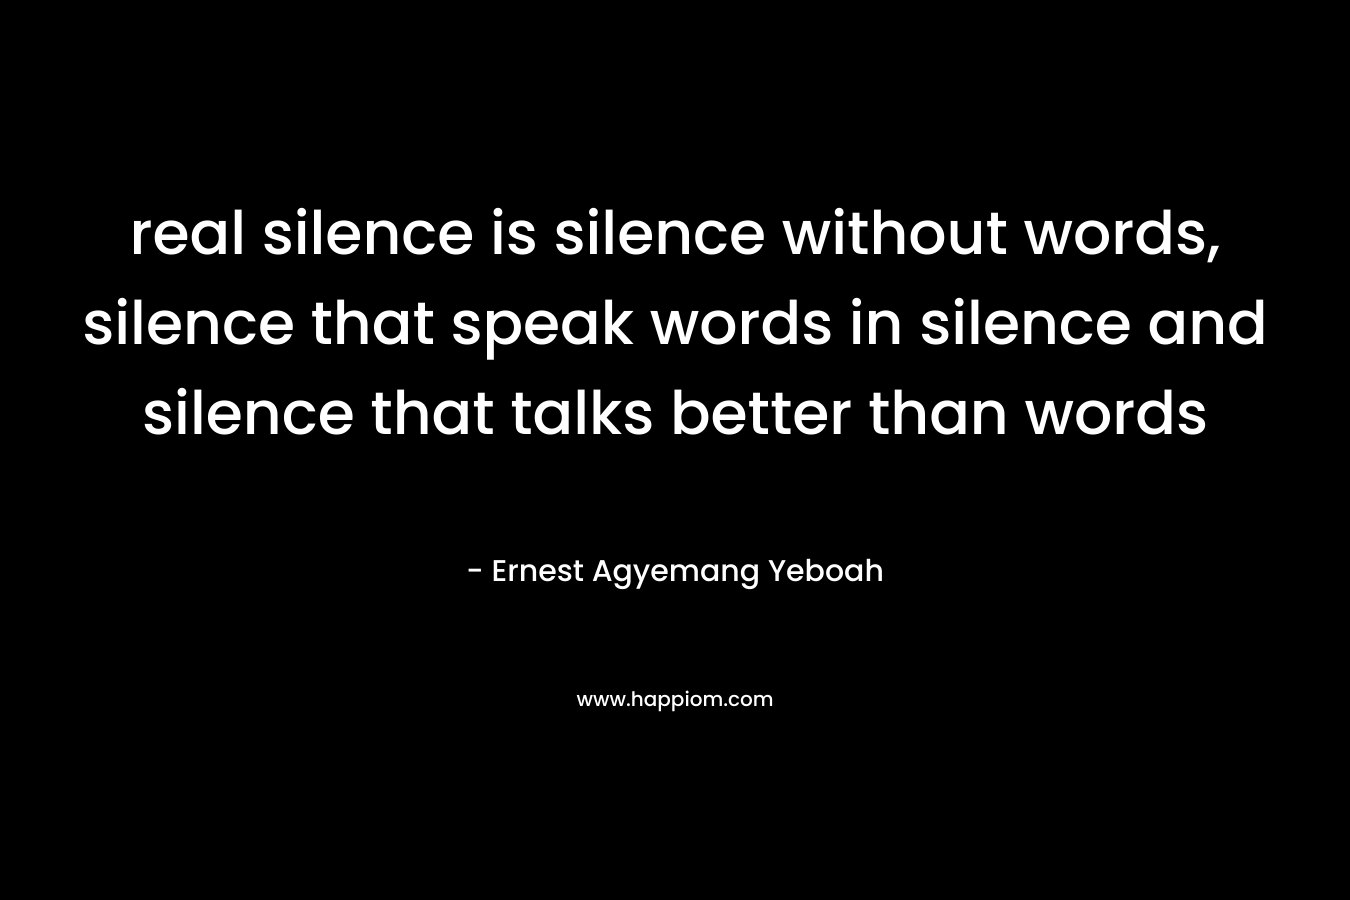 real silence is silence without words, silence that speak words in silence and silence that talks better than words